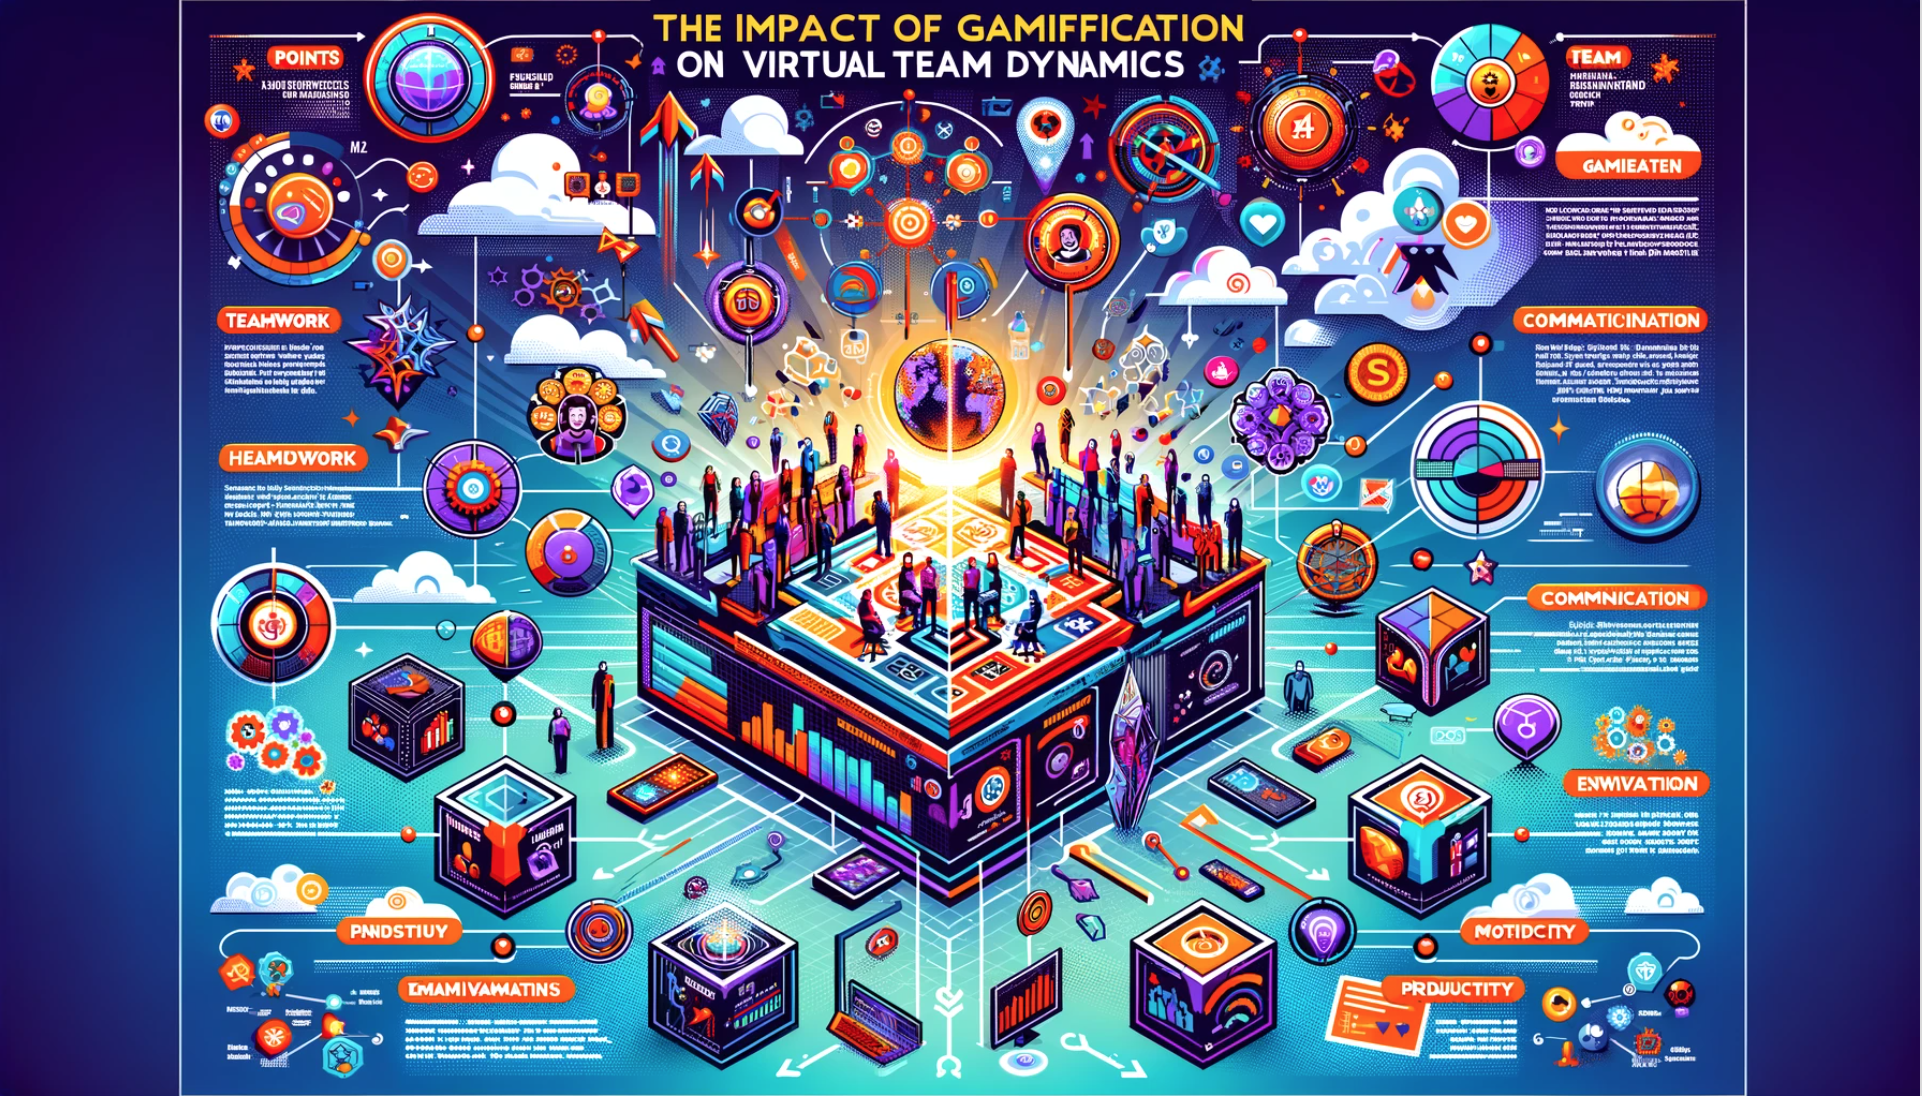 The Impact of Gamification on Virtual Team Dynamics